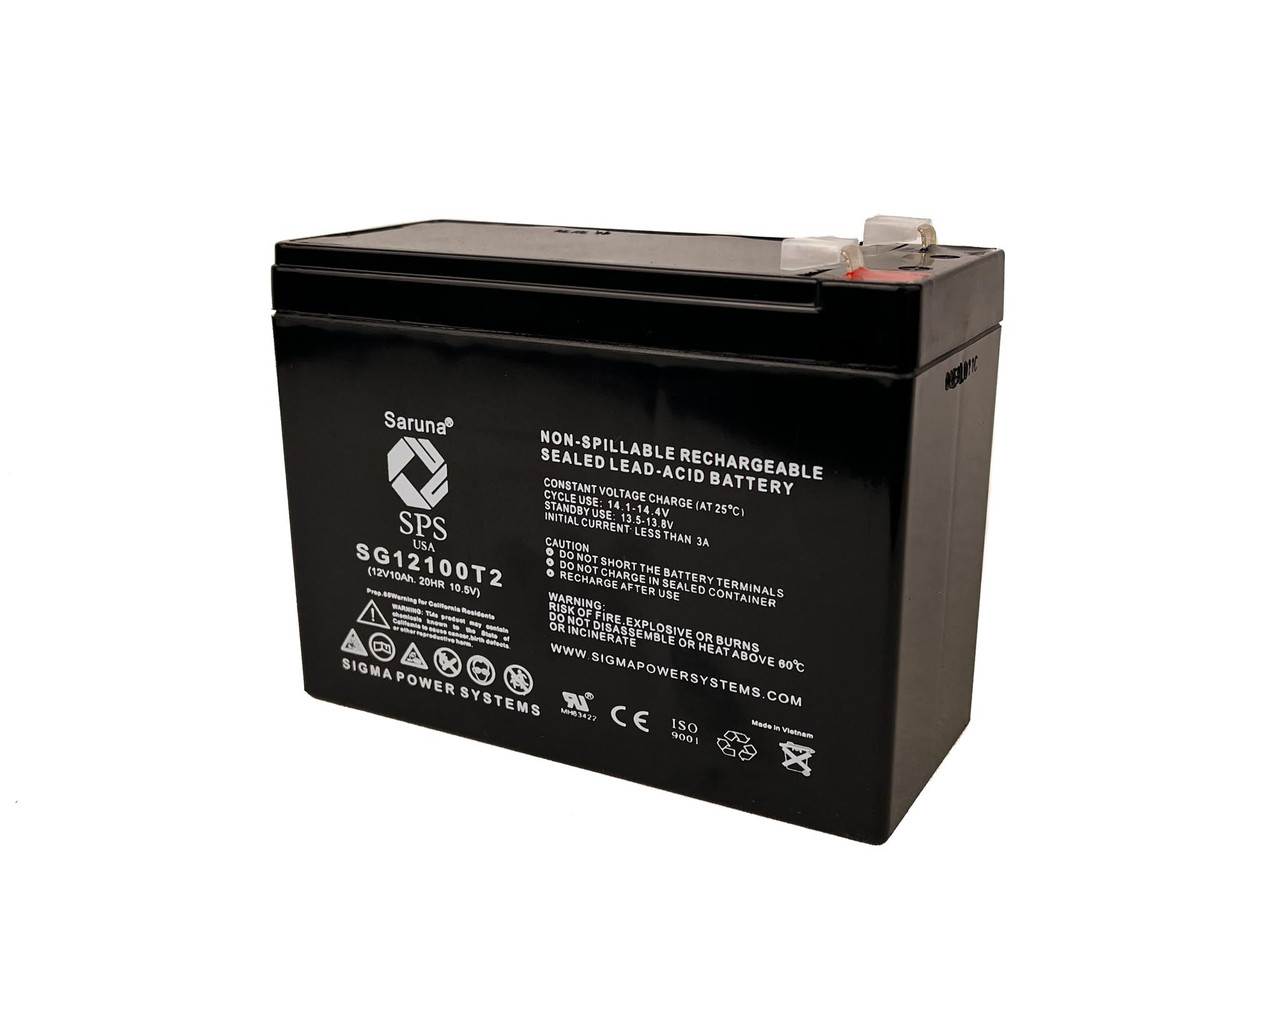 Raion Power 12V 10Ah Non-Spillable Replacement Rechargebale Battery for HCF Pacelite Cute 002